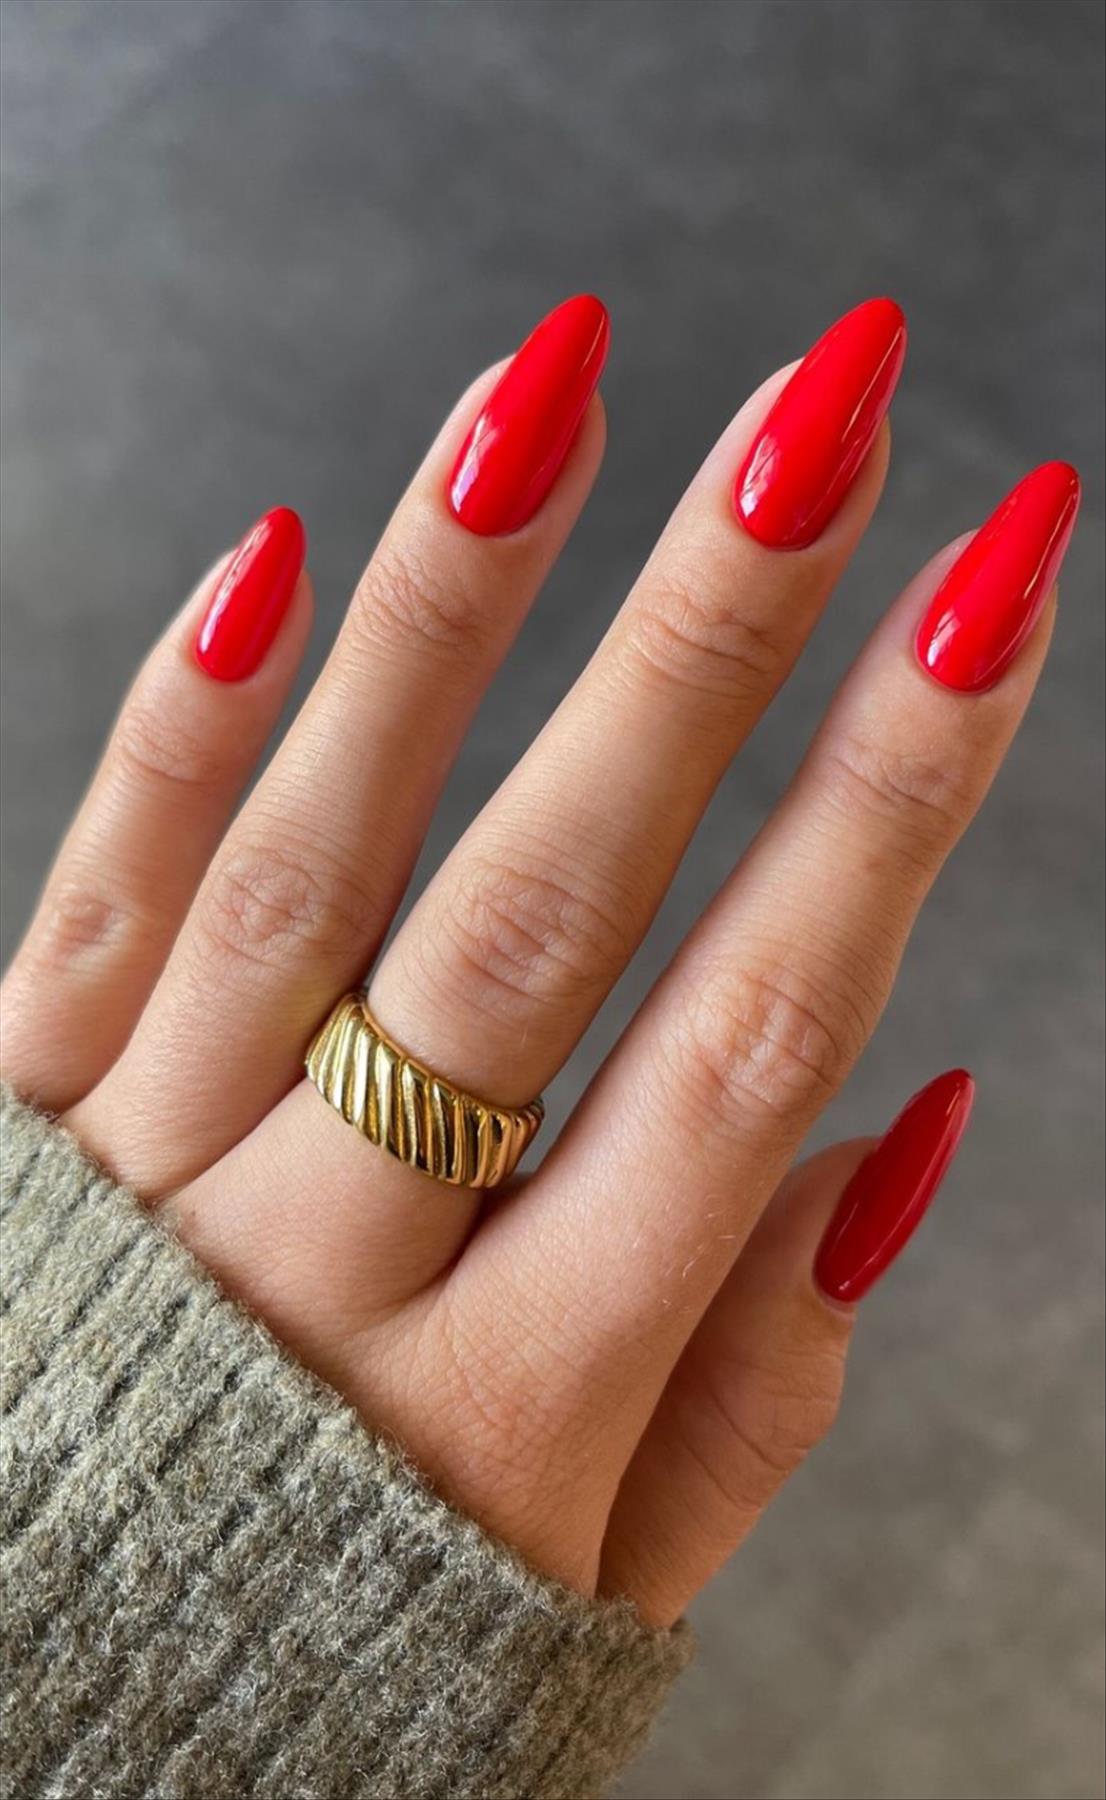 Best New Year's Nails To Rock in 2023